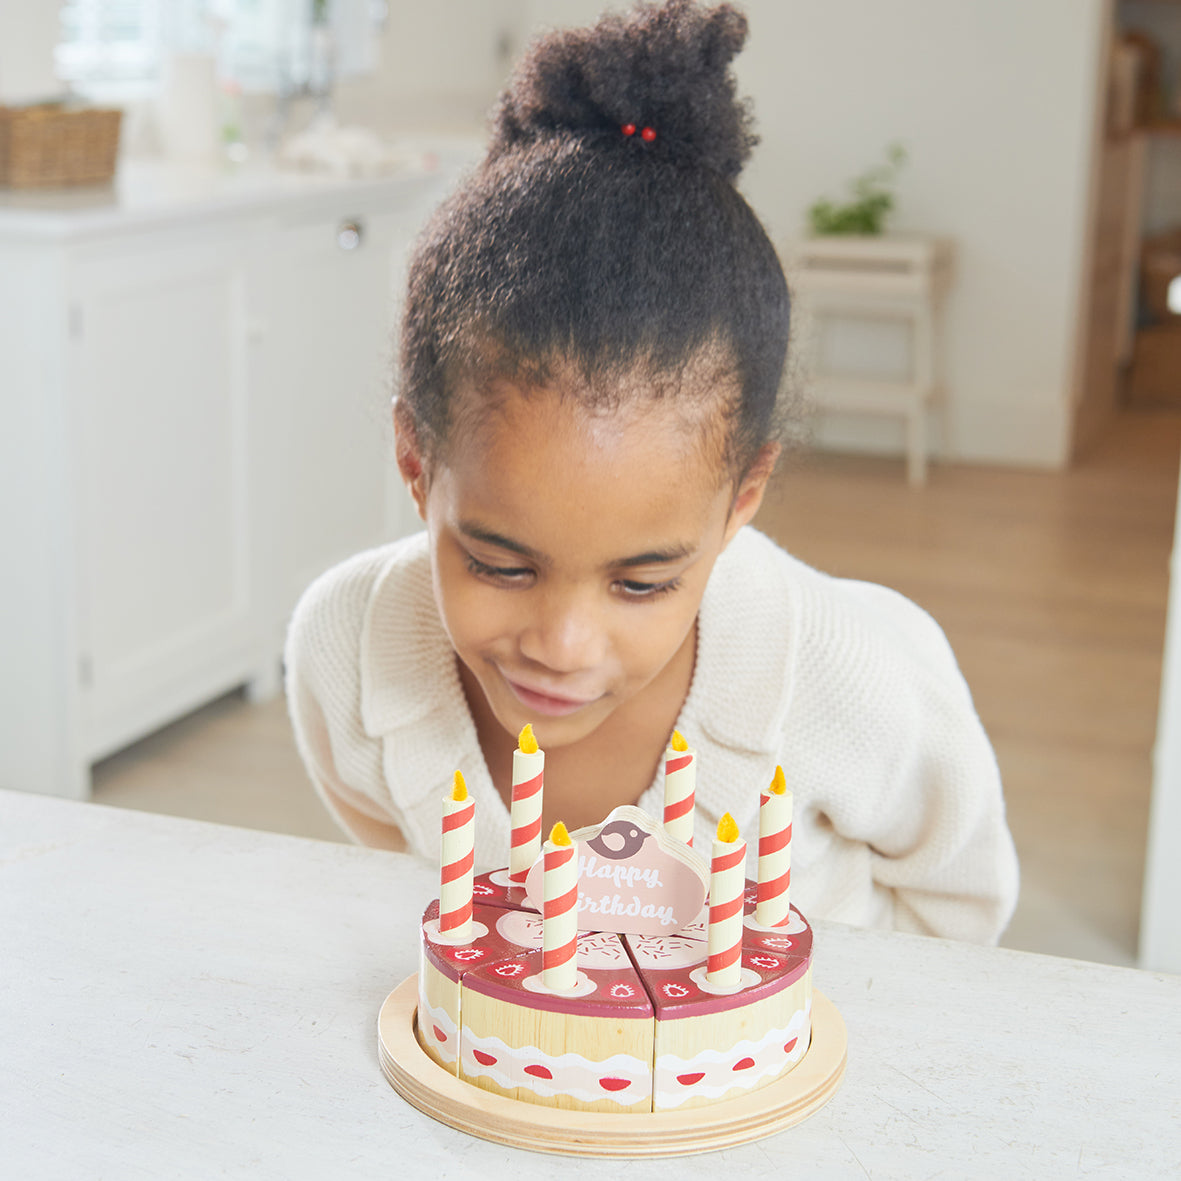 Child pretending to blow out candles on wooden toy chocolate birthday cake with six candles and cake topper which says happy birthday.  The cake is divided into six pieces and presented on a wooden plate.